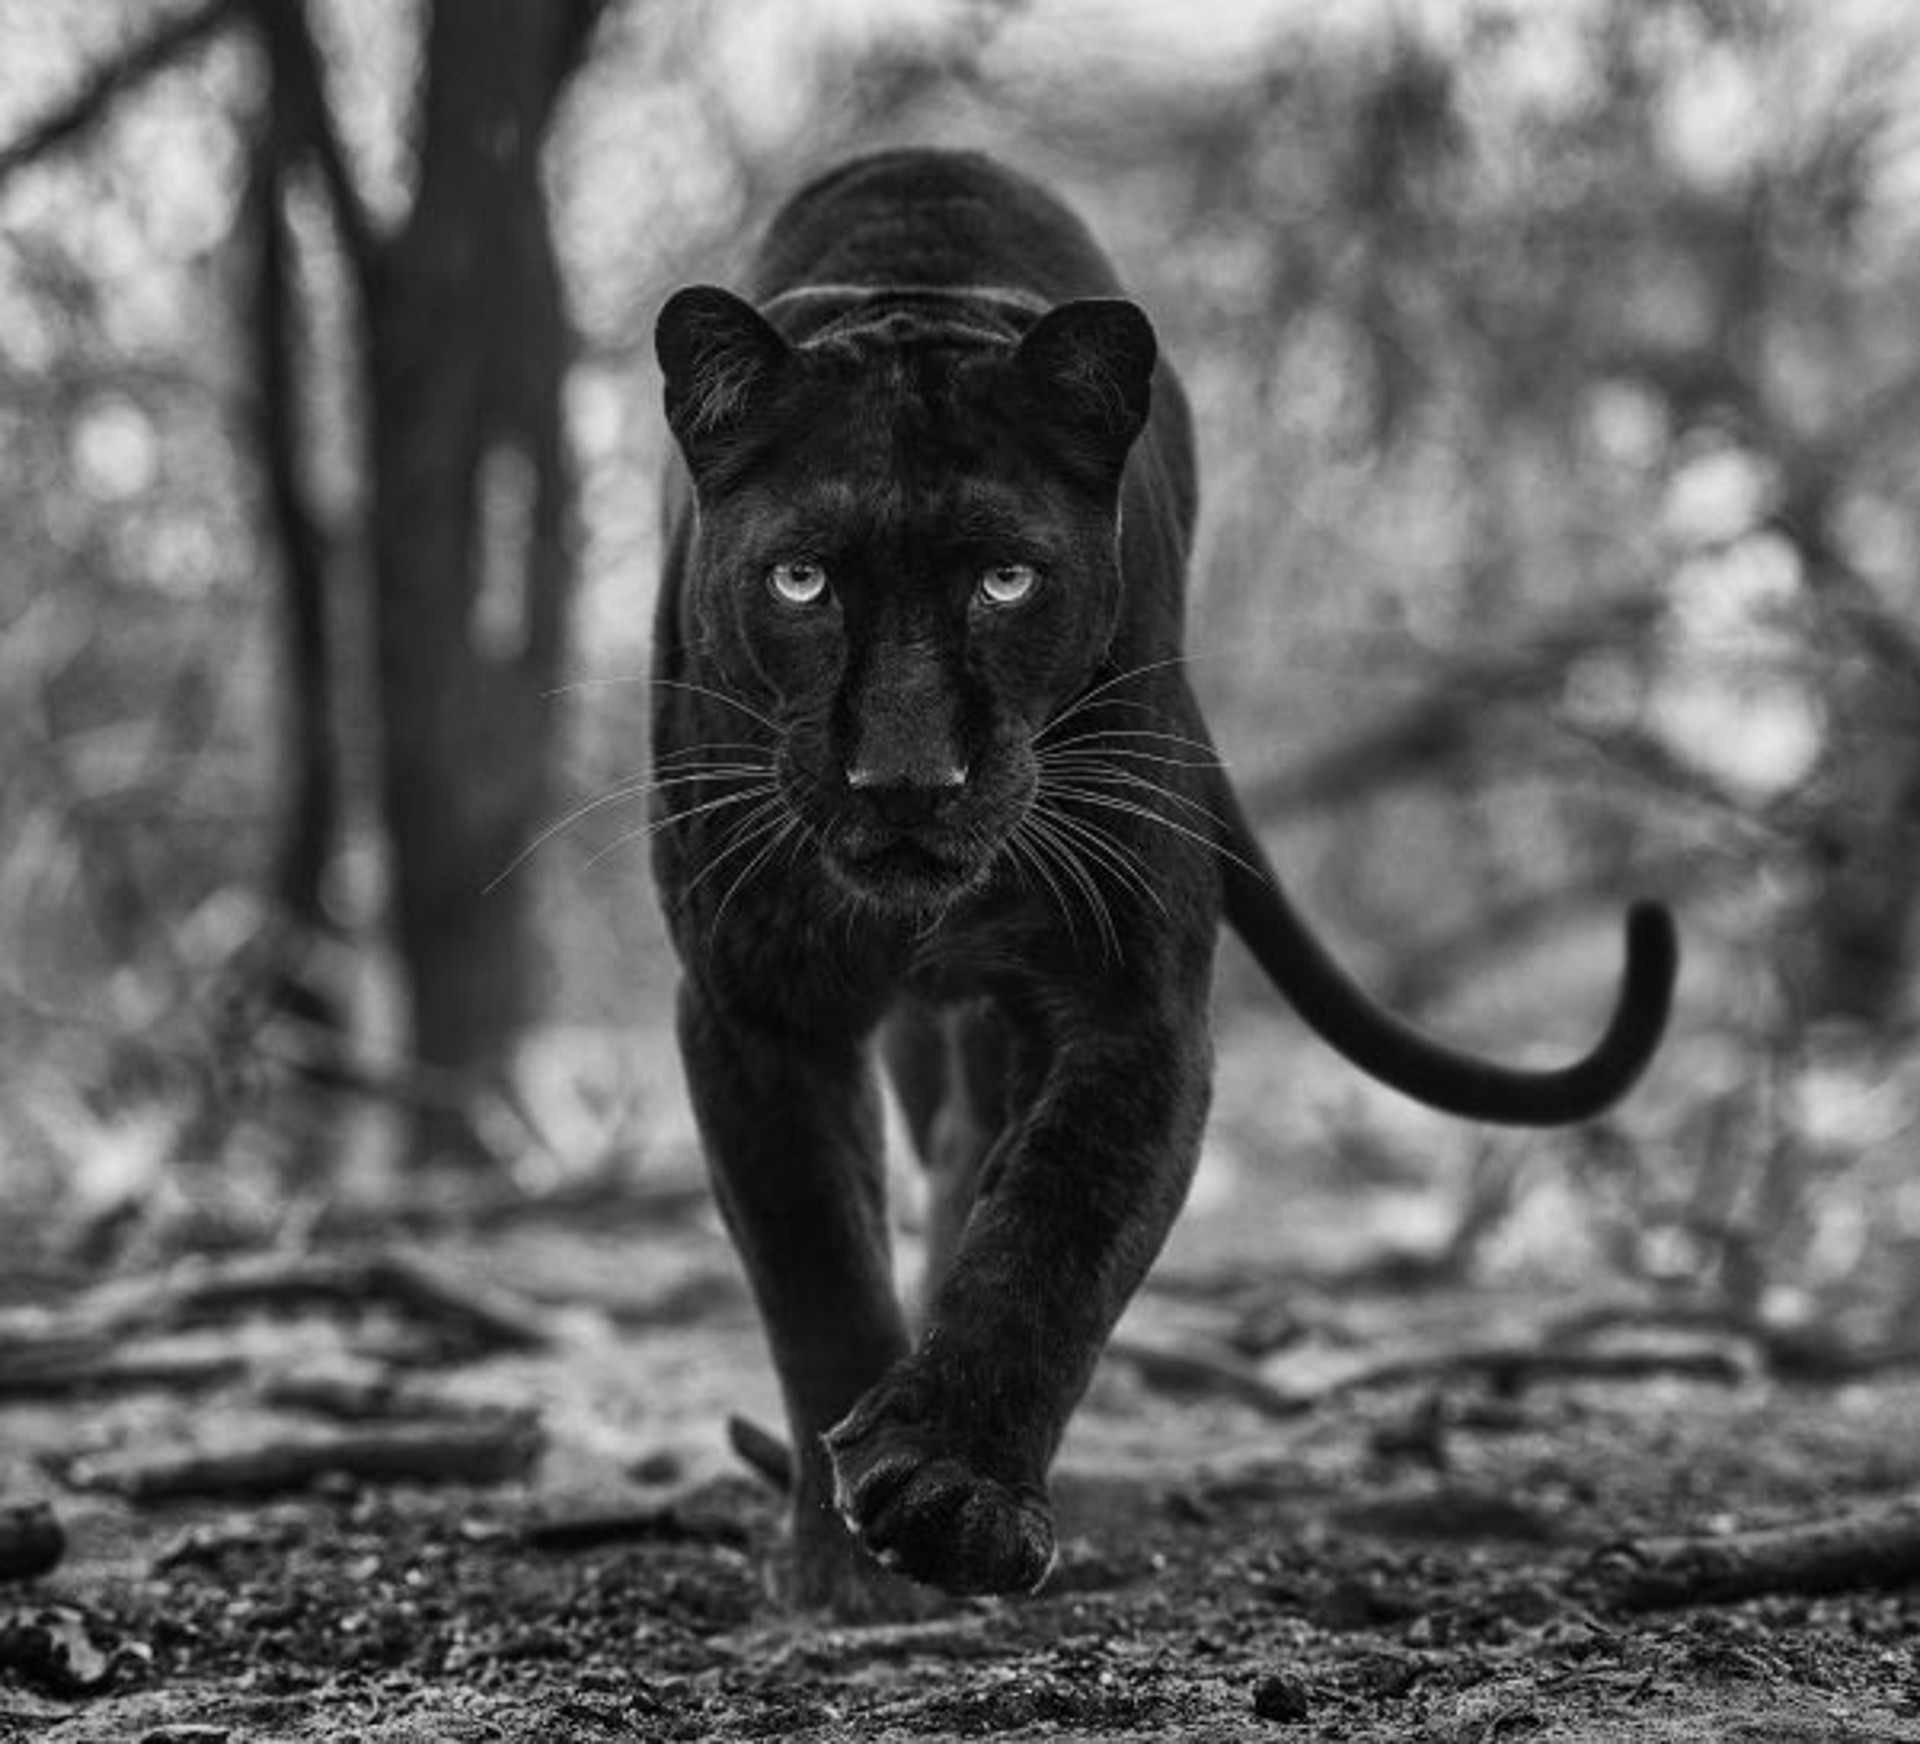 Remains Of The Day by David Yarrow